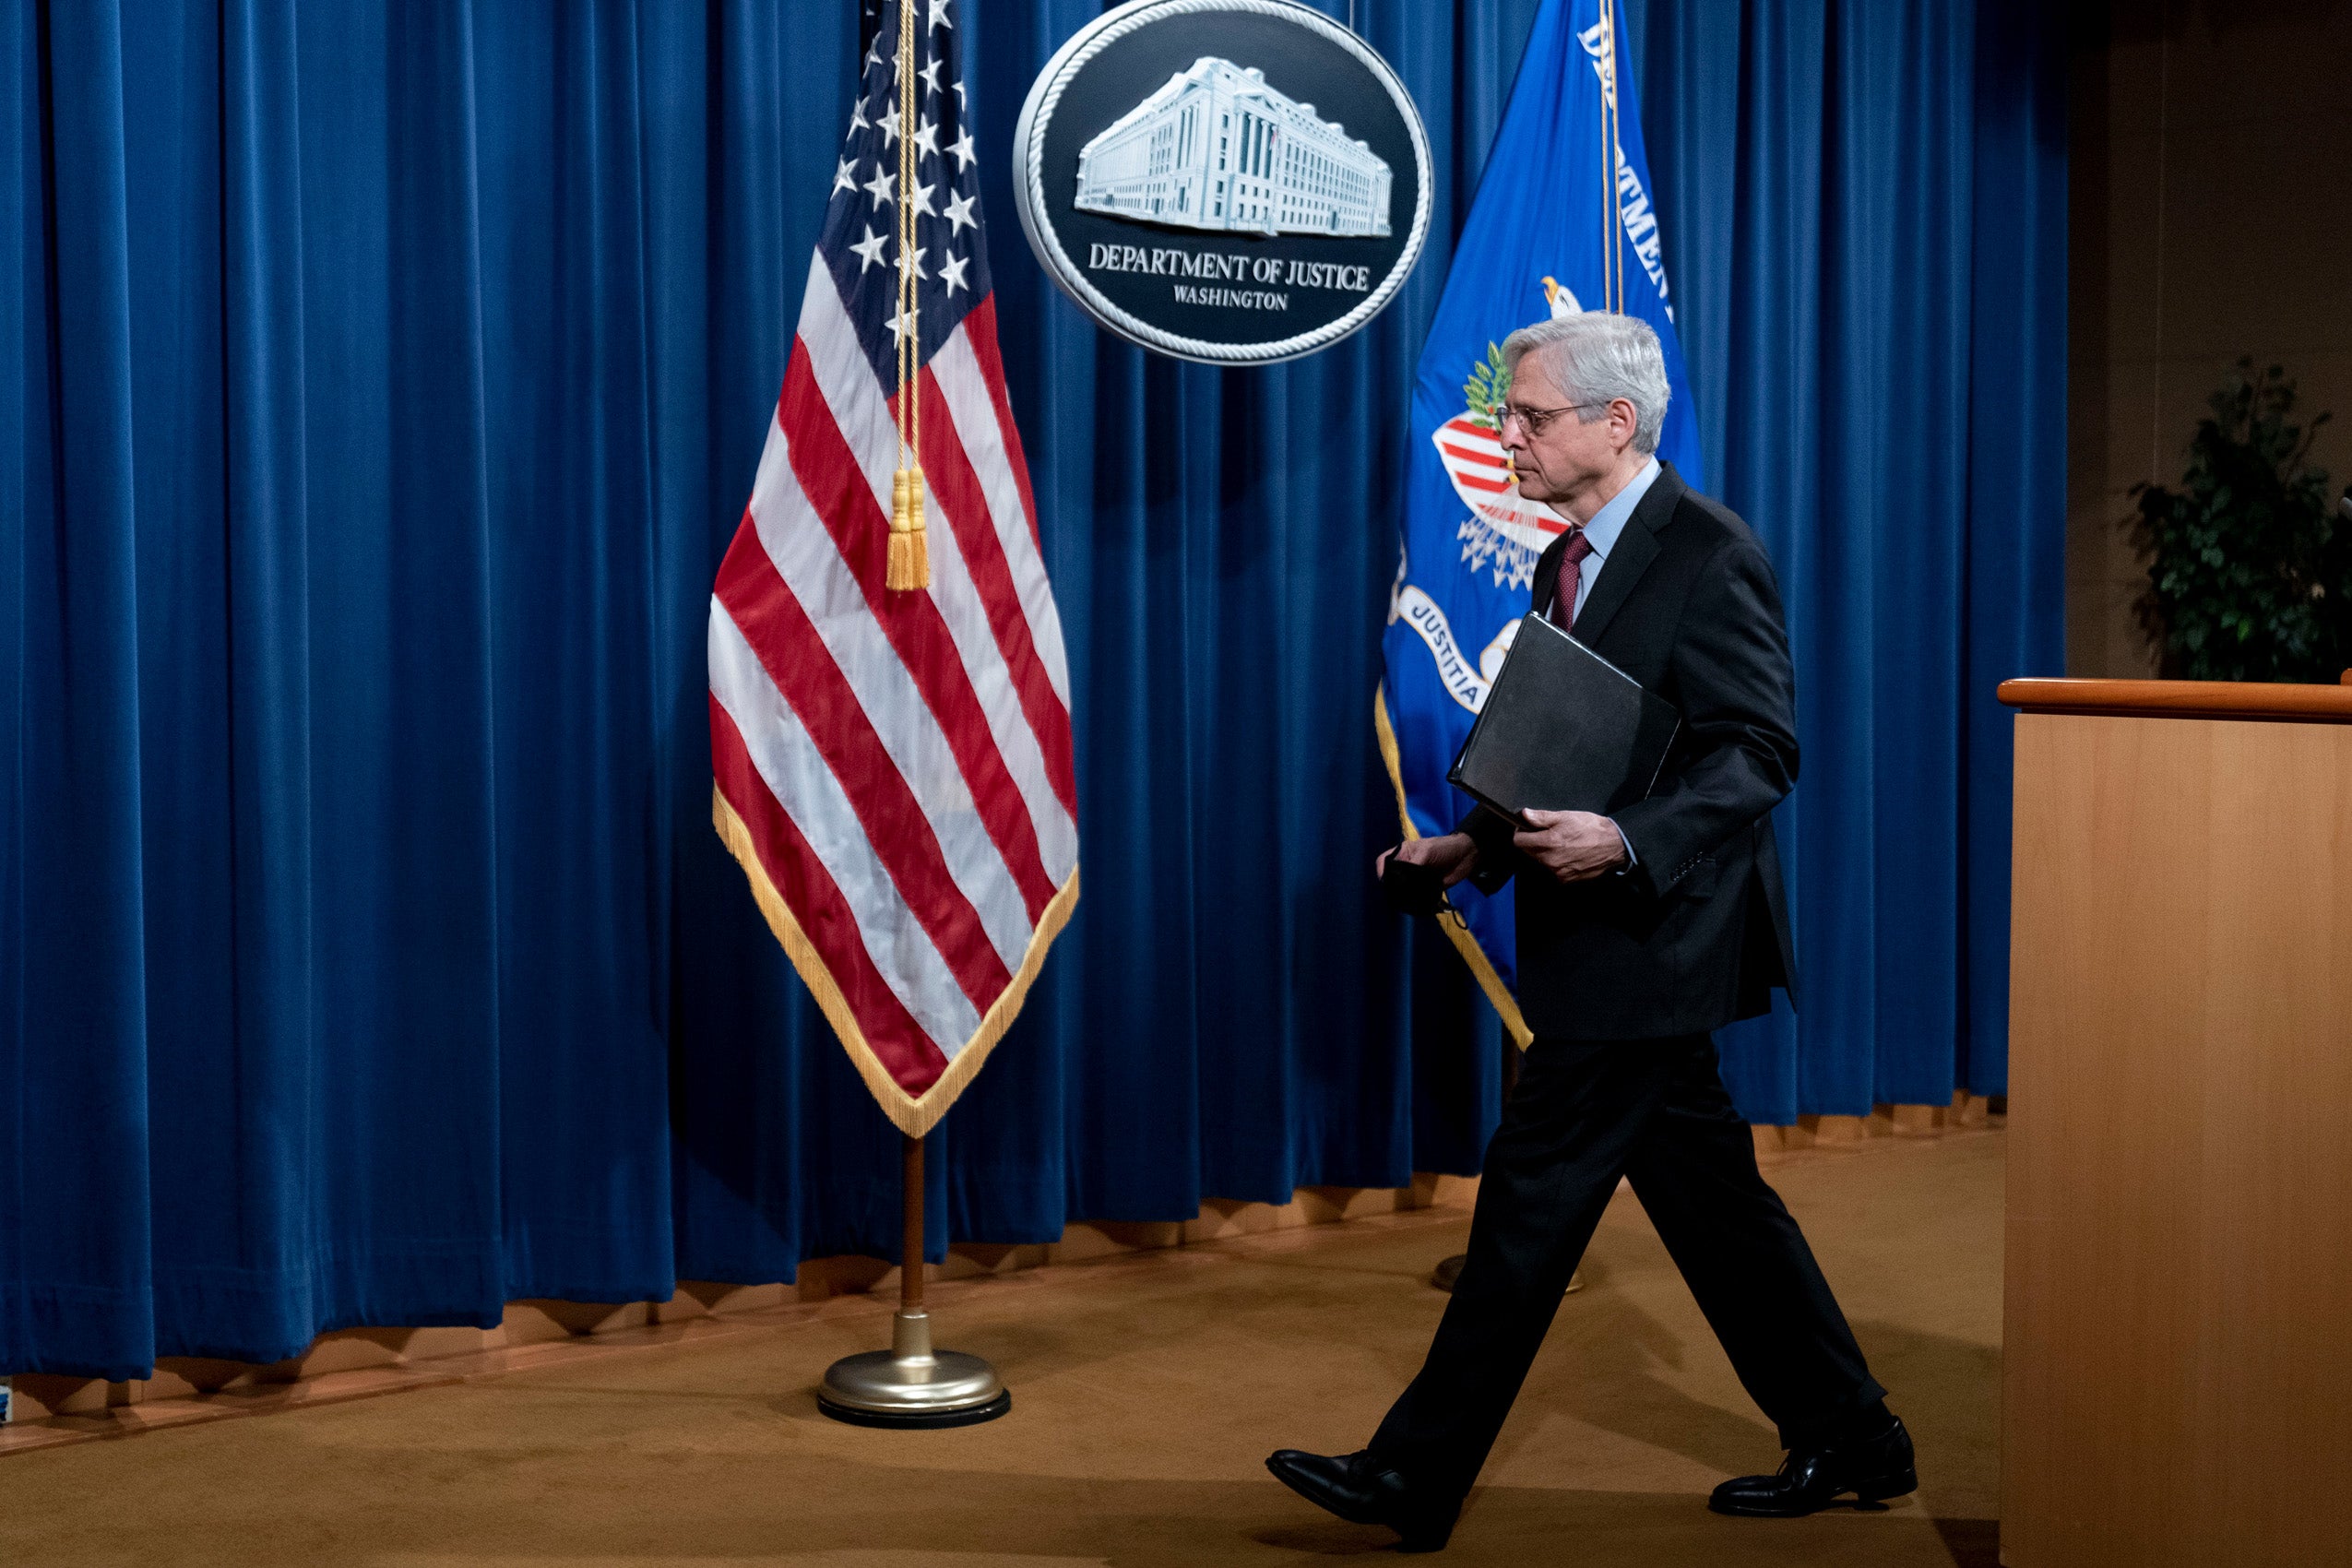 Man walking away from a podium by an American Flag and a sign that says Department of Justice Washington